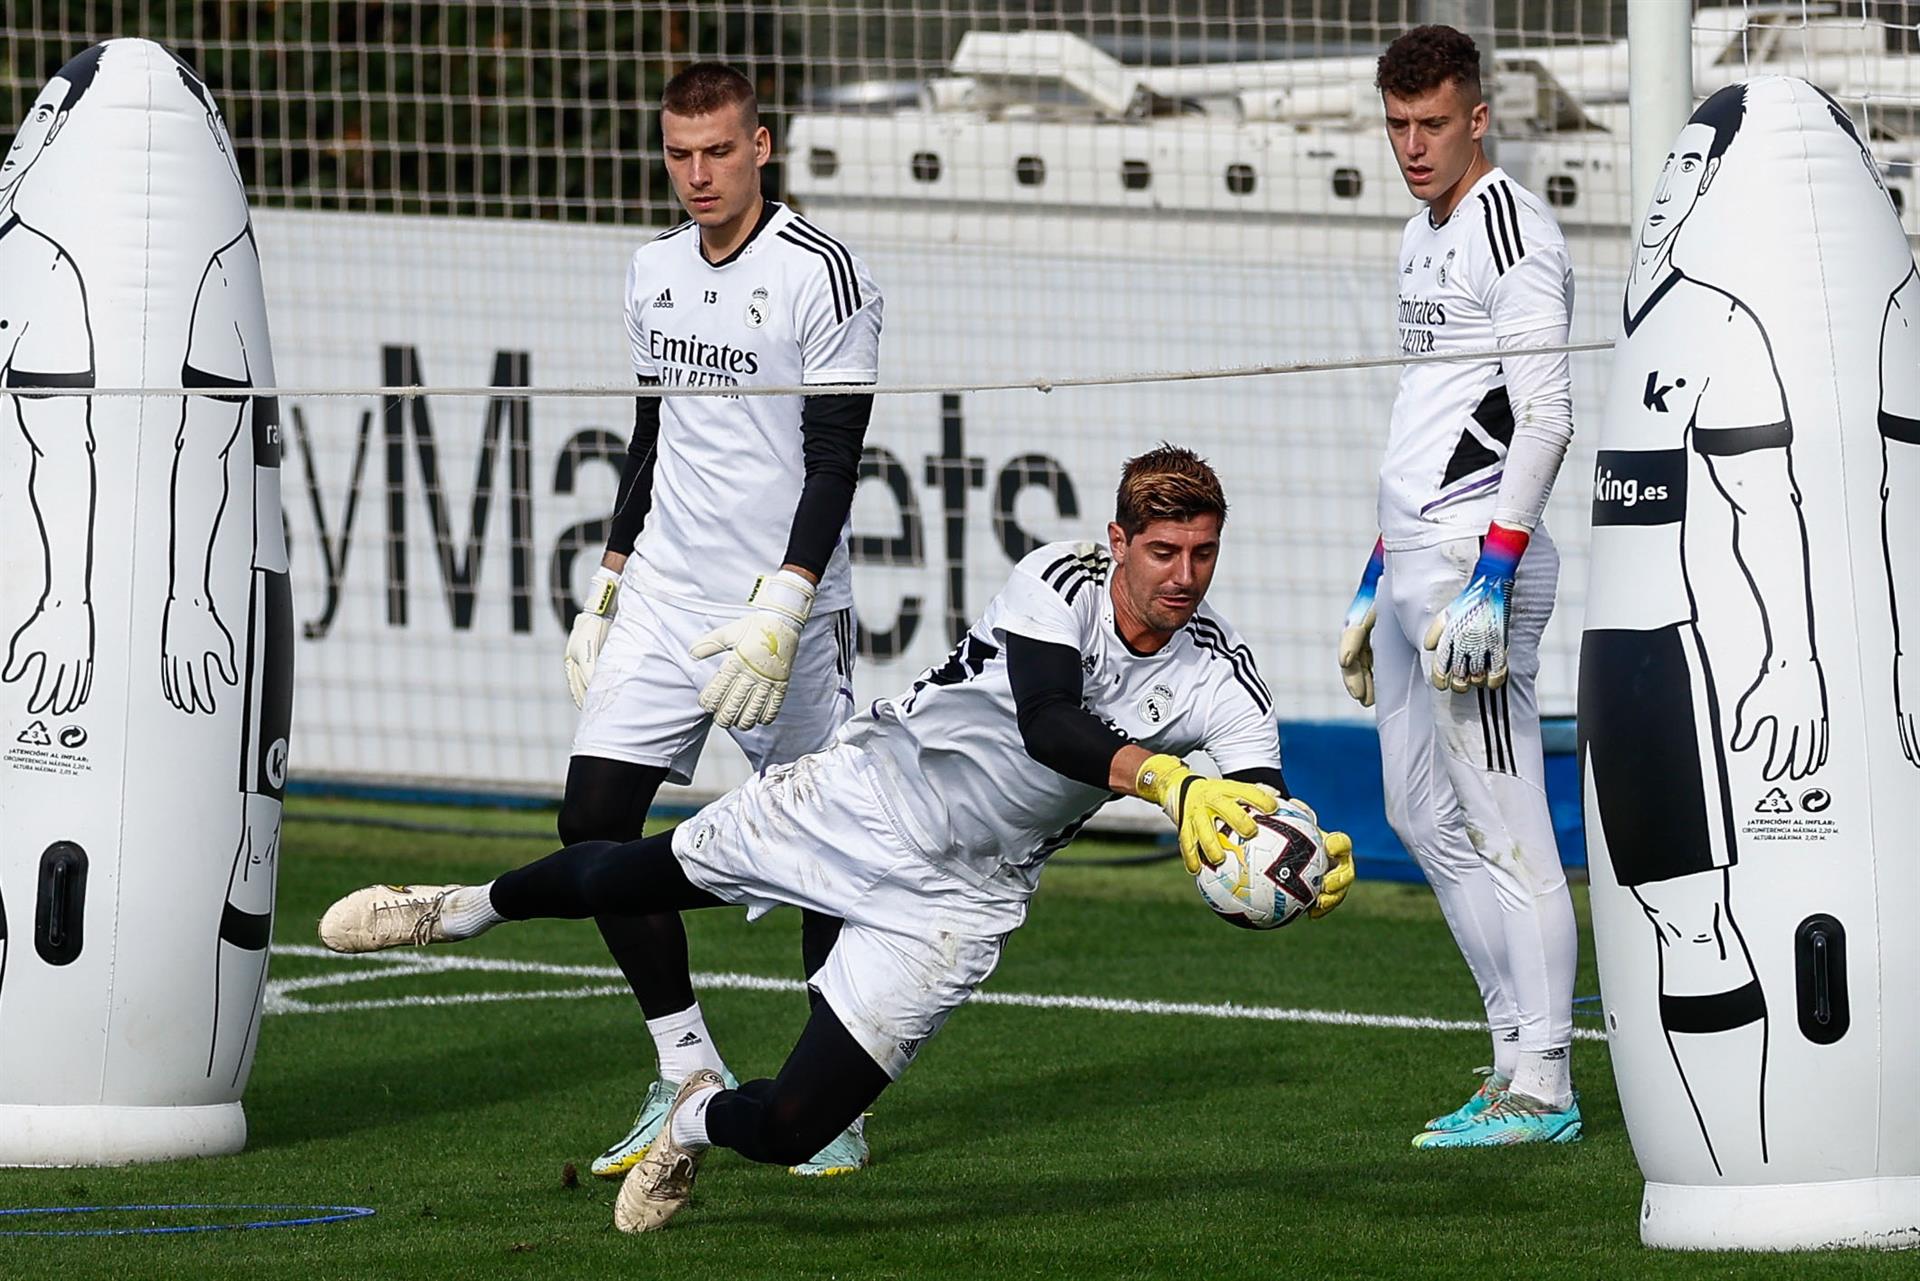 "Madrid's goalkeeper? No one better to decide than Ancelotti"